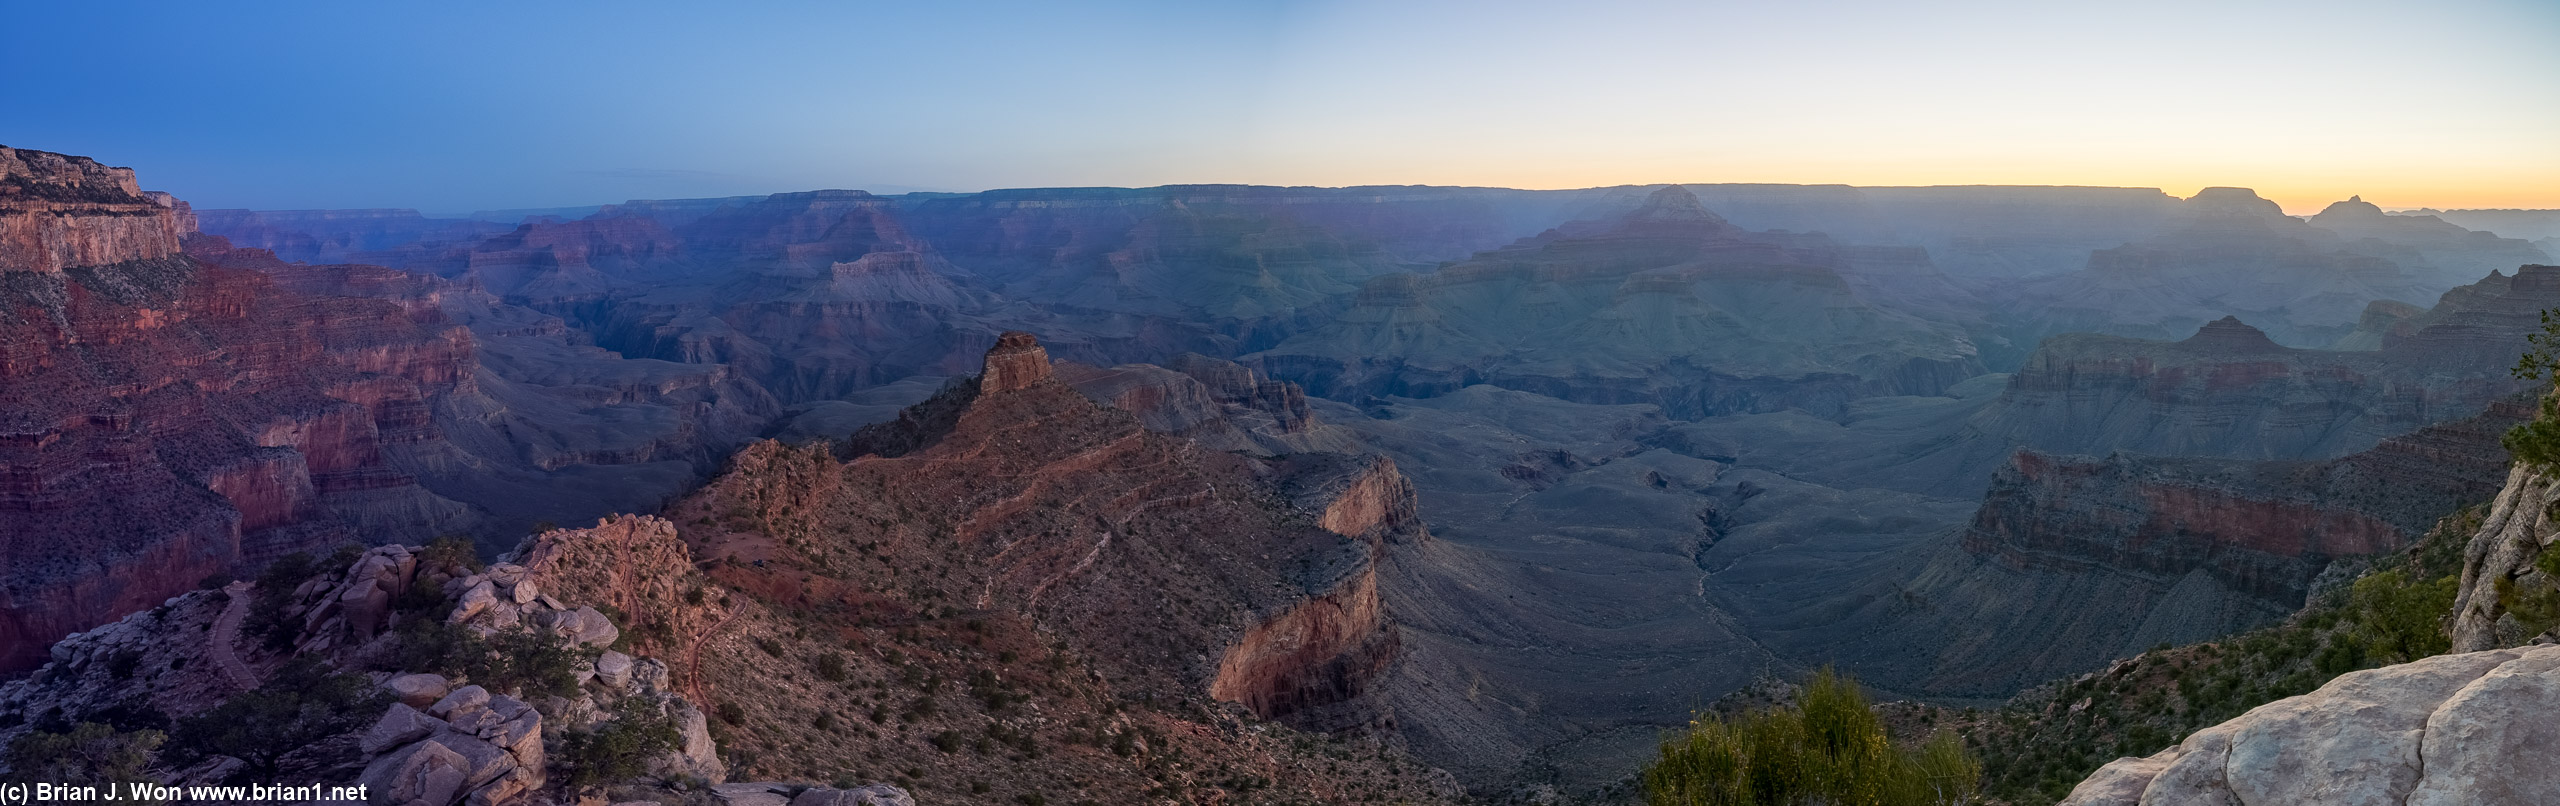 Starting to soak in just how vast the Grand Canyon is.